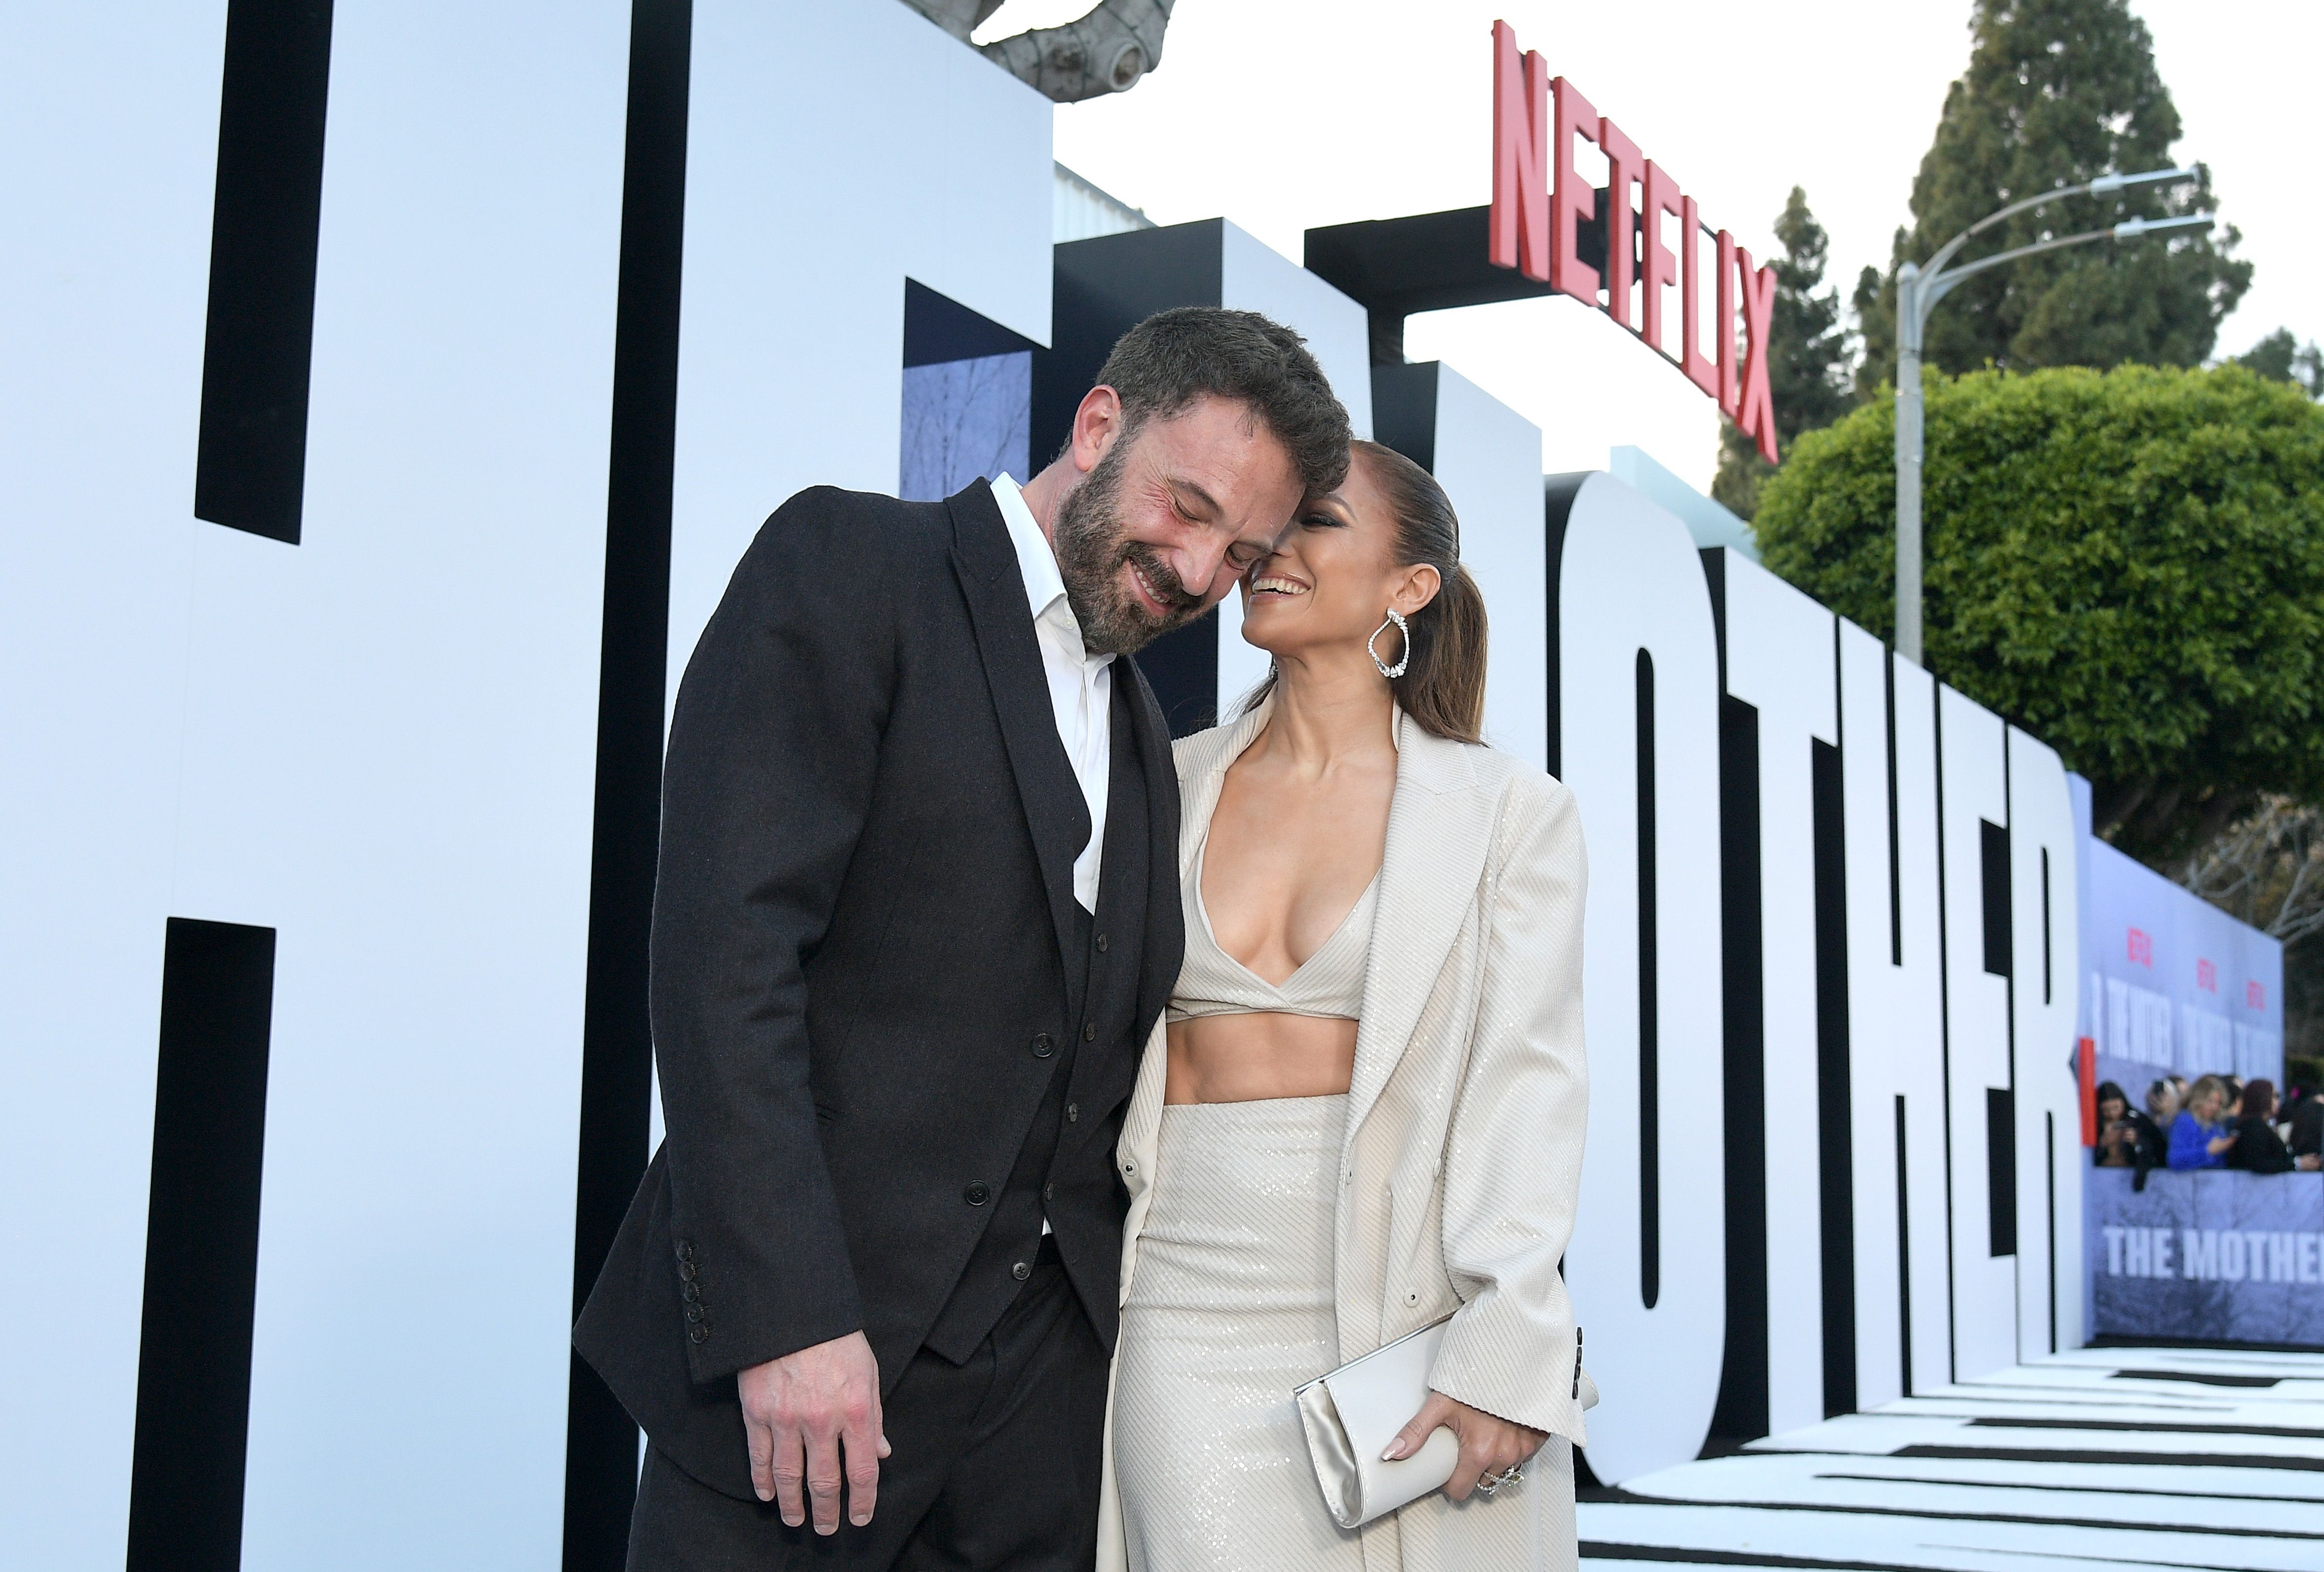 Ben Affleck and Jennifer Lopez at the premiere of "The Mother" in Los Angeles, California on May 10, 2023 | Source: Getty Images